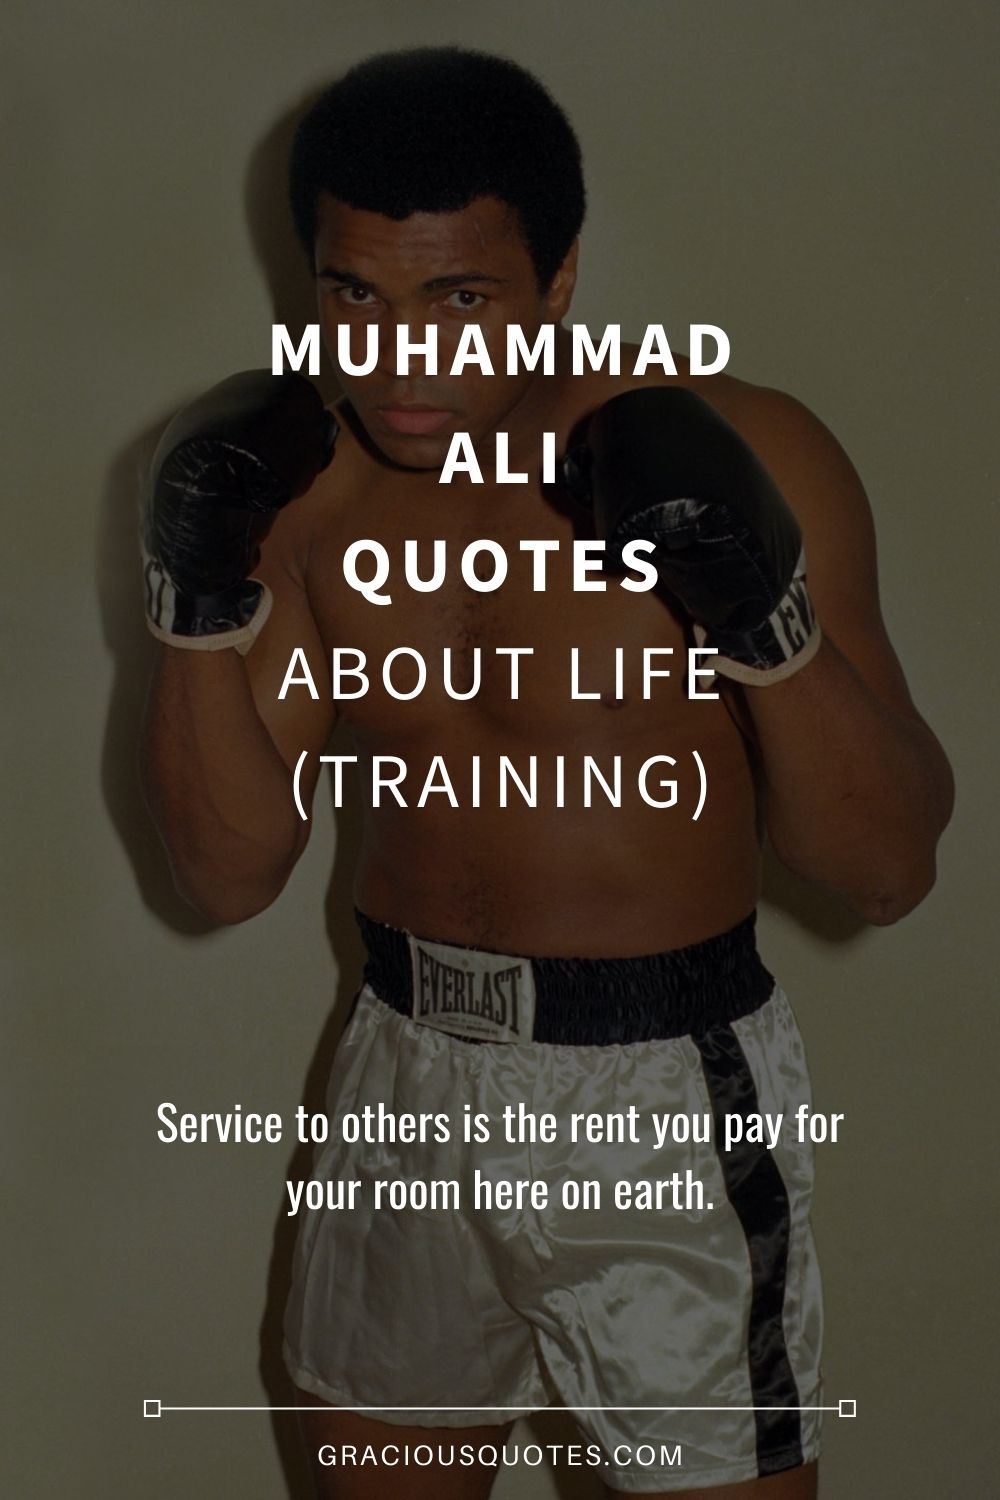 Muhammad Ali Quotes About Life (TRAINING) - Gracious Quotes